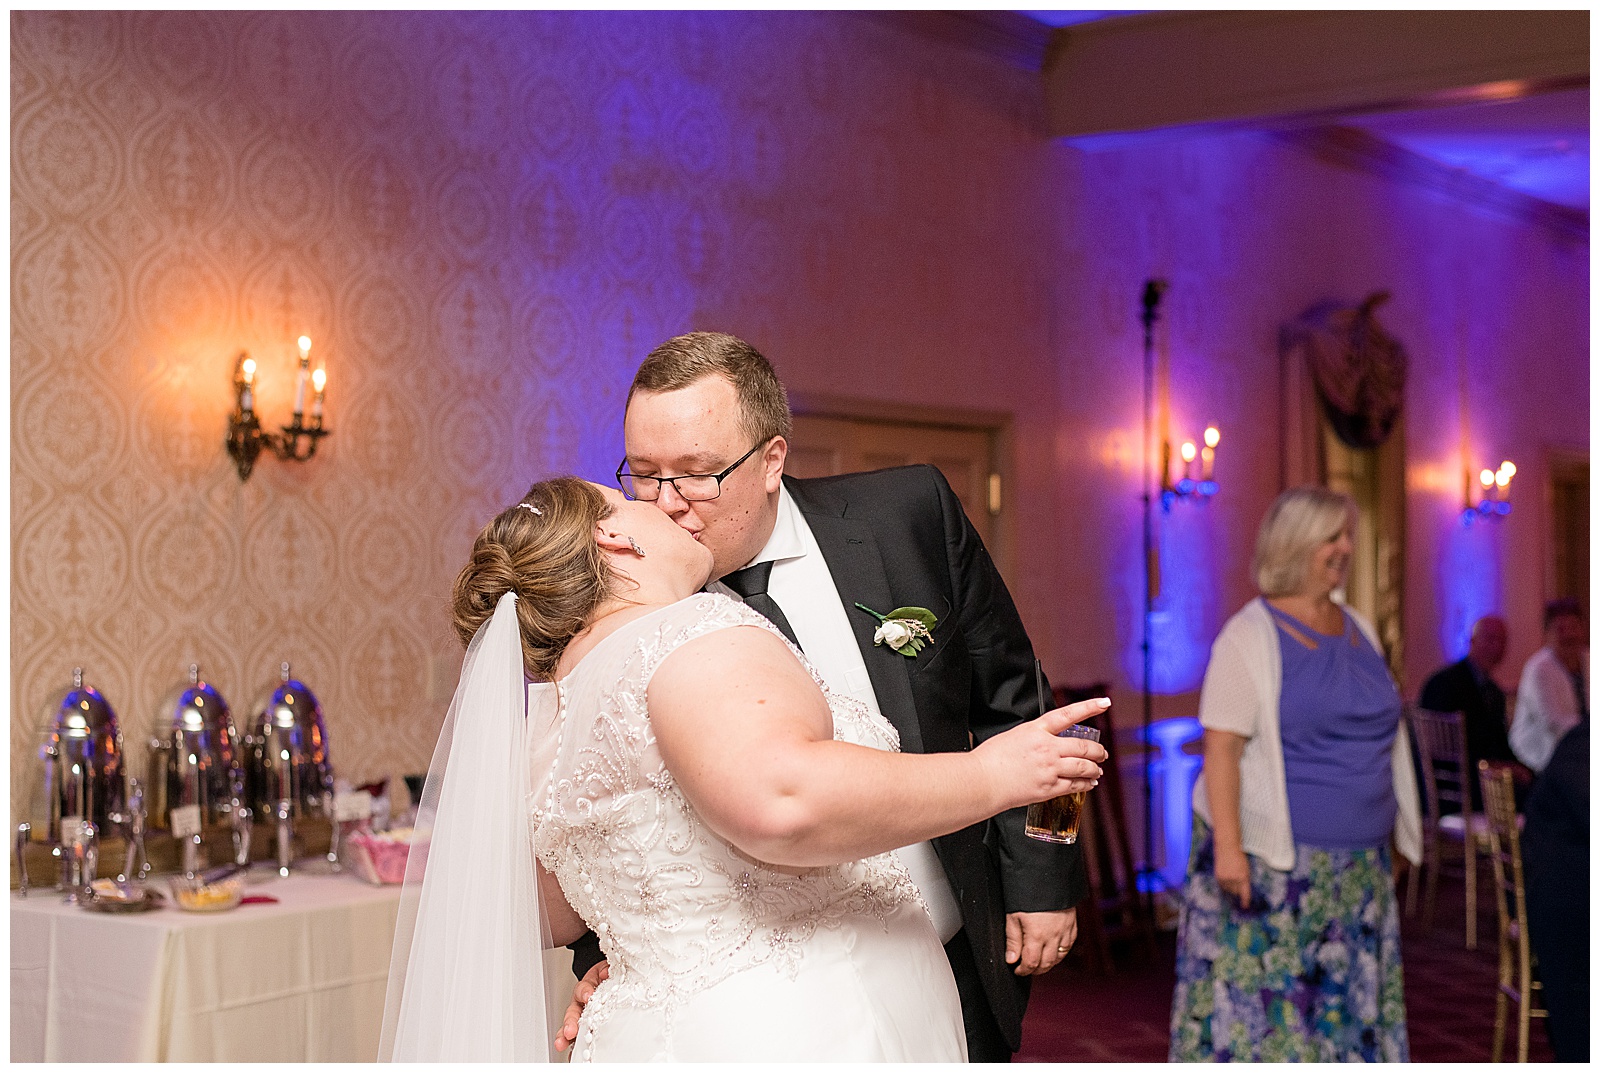 groom kissing bride on dance floor during wedding reception with colorful lights behind them in strasburg pennsylvania